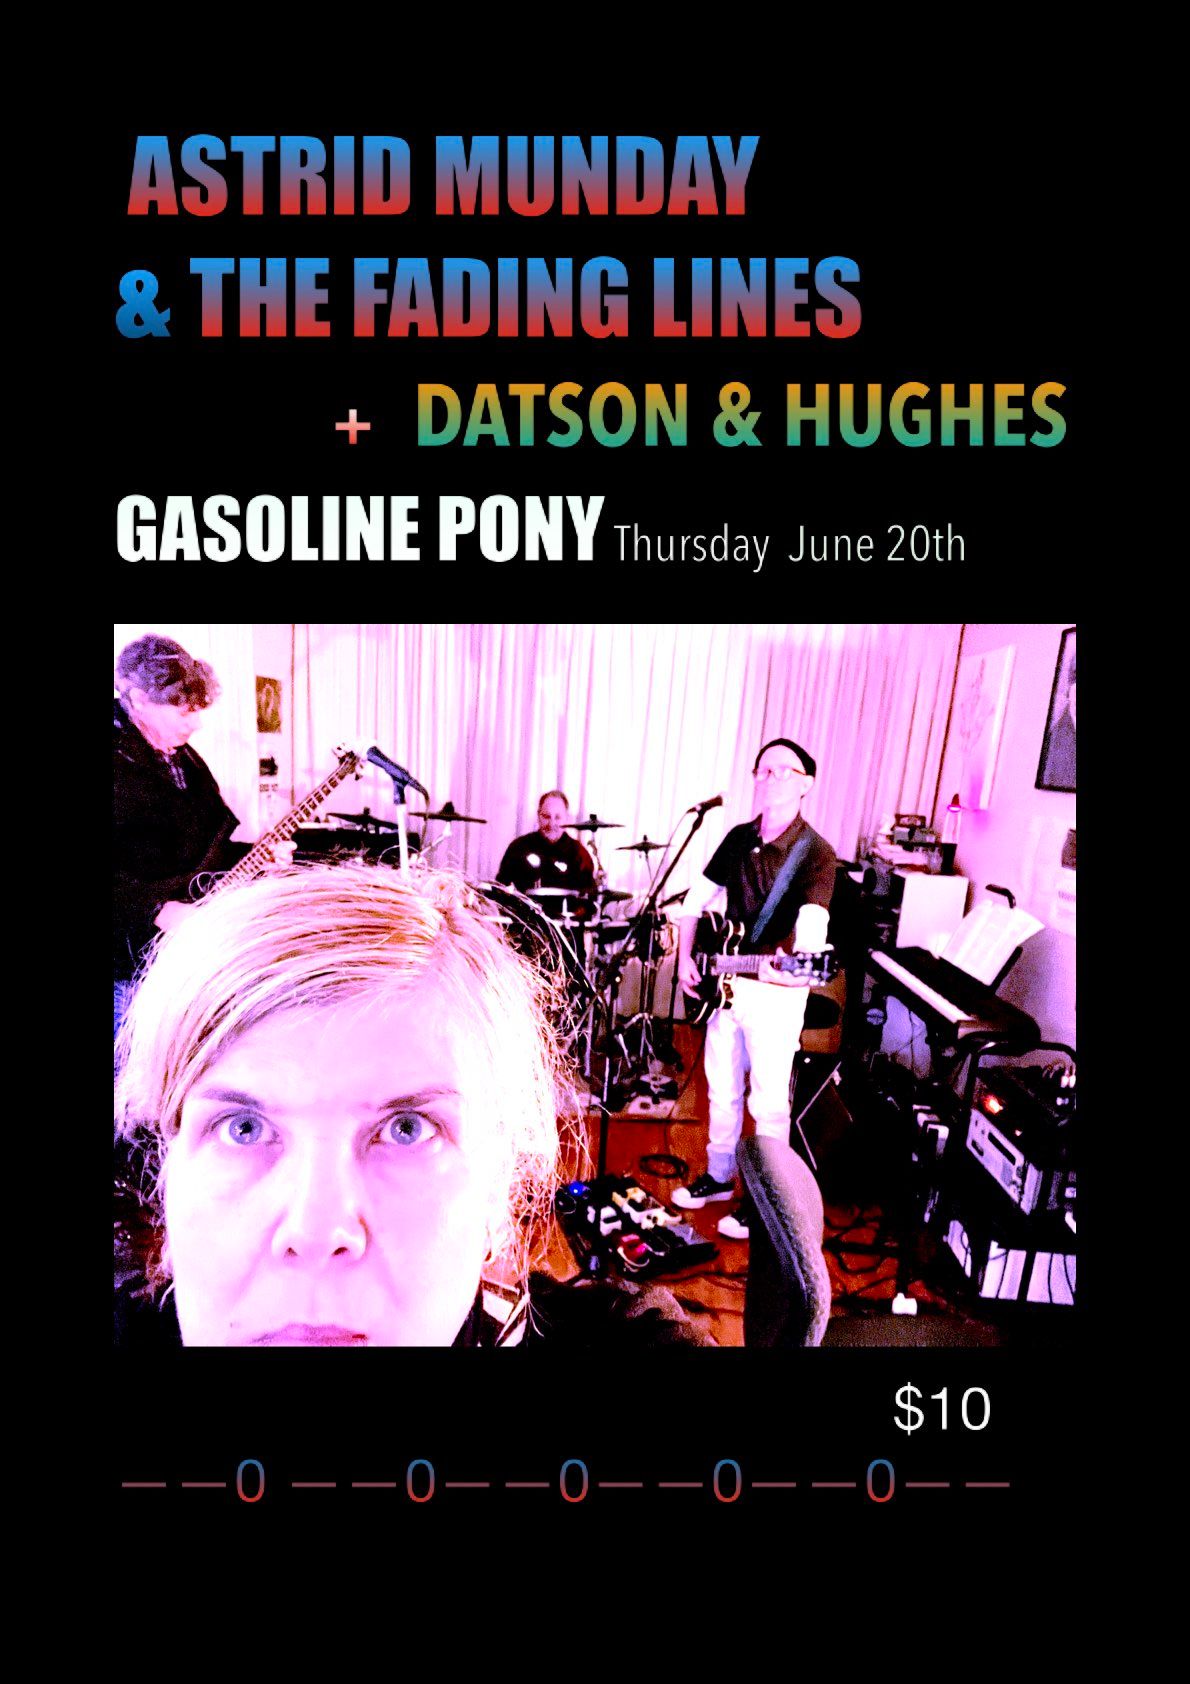 Astrid Munday & the Fading Lines + Datson Hughes